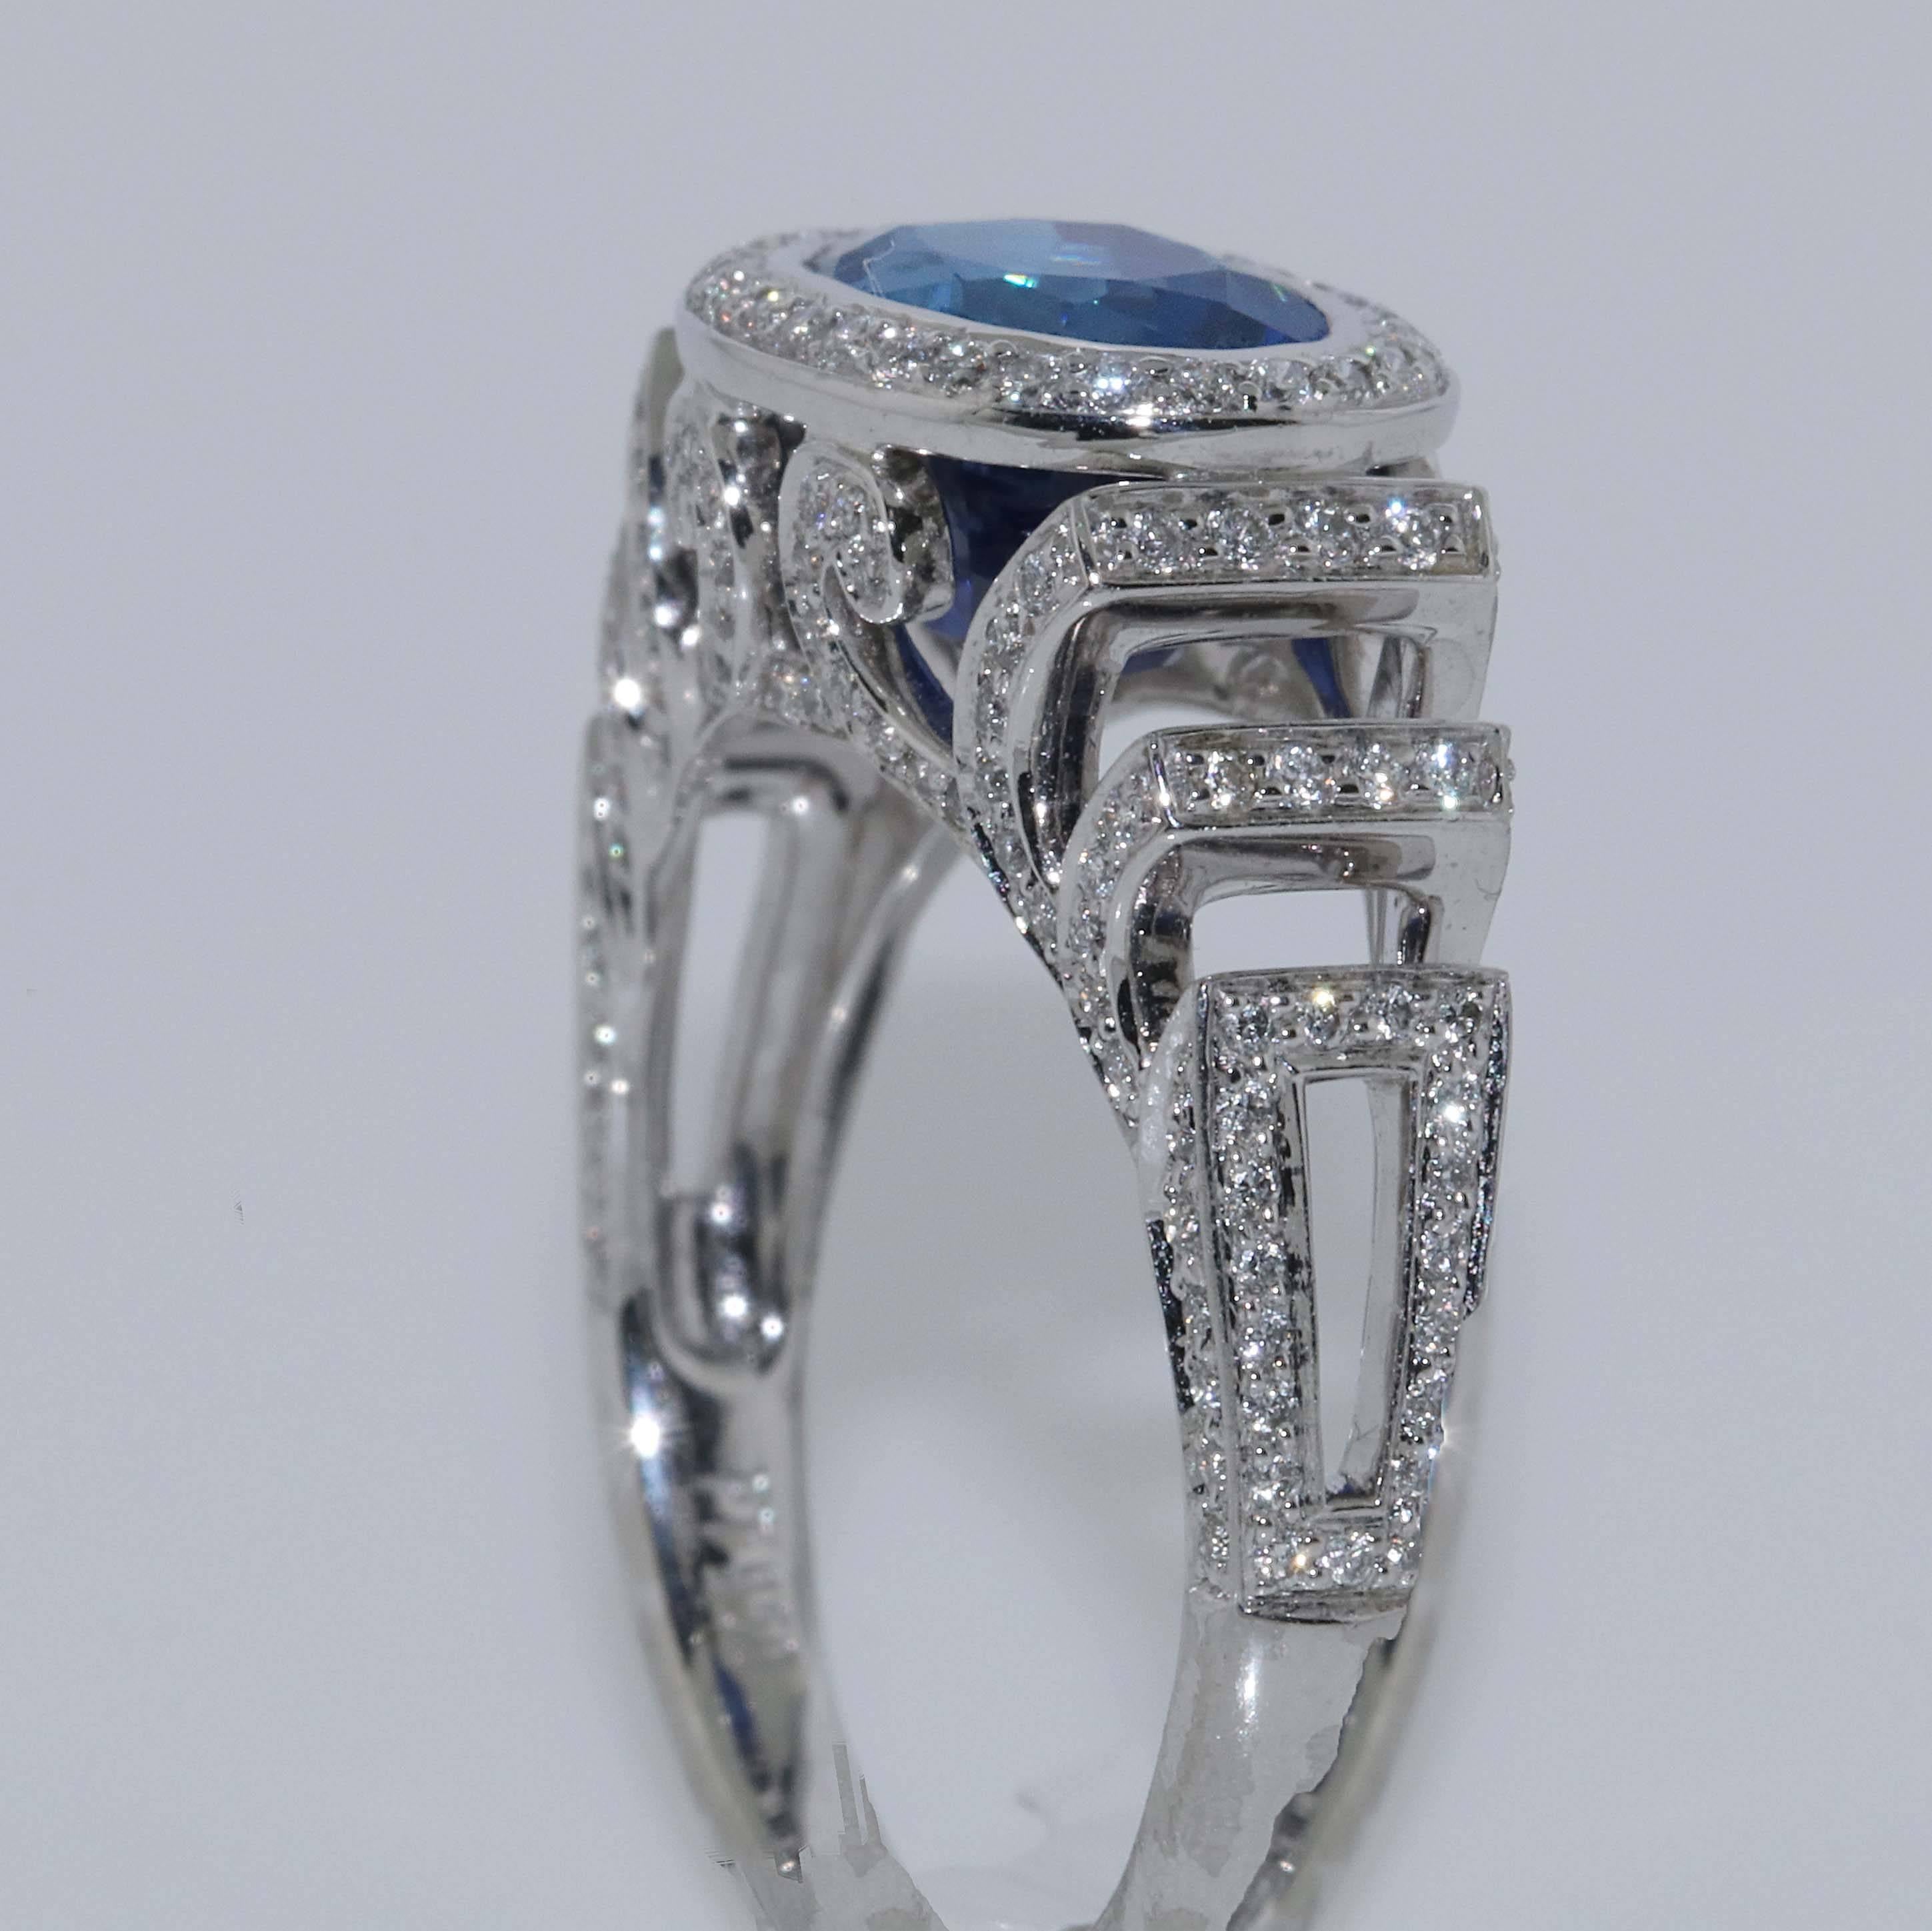 AGTA Certified 3.54 carat Burma No Heat blue sapphire and diamond modern ring. The oval blue sapphire is sitting east-west. The AGTA certificate shows there is no clarity enhancements and the color is completely natural. The diamond ring has 0.46